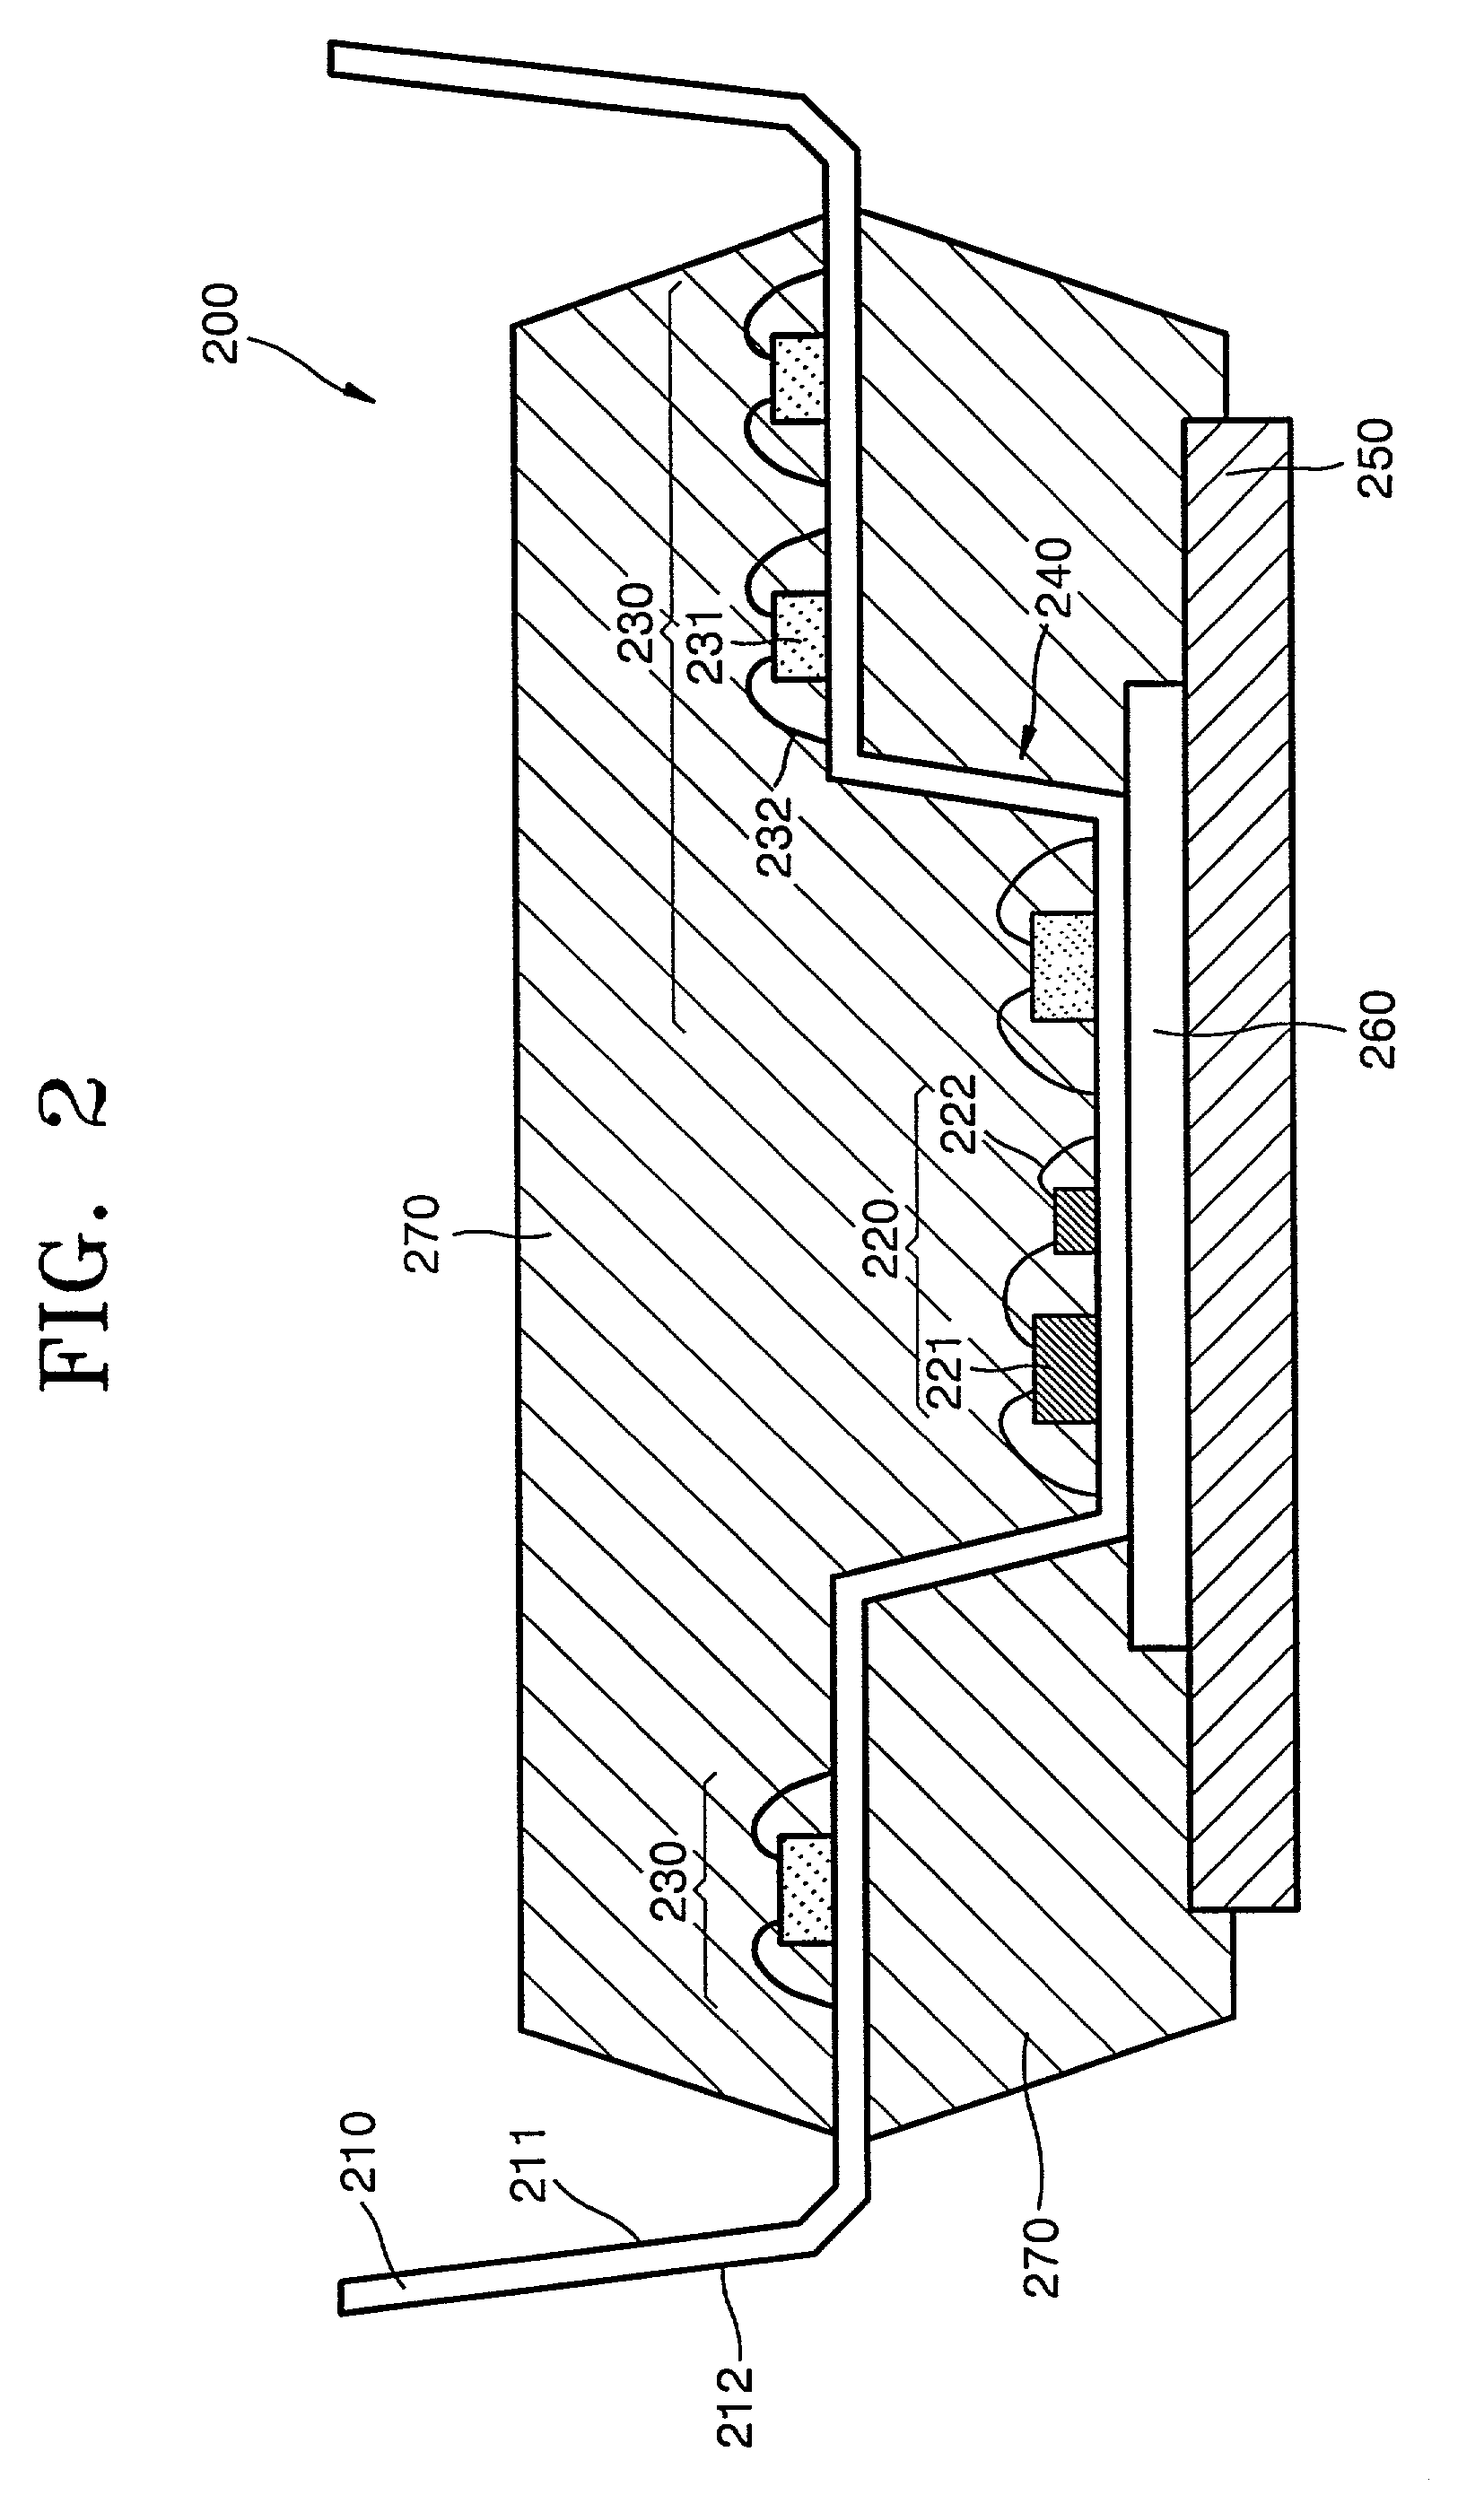 Power module package having improved heat dissipating capability